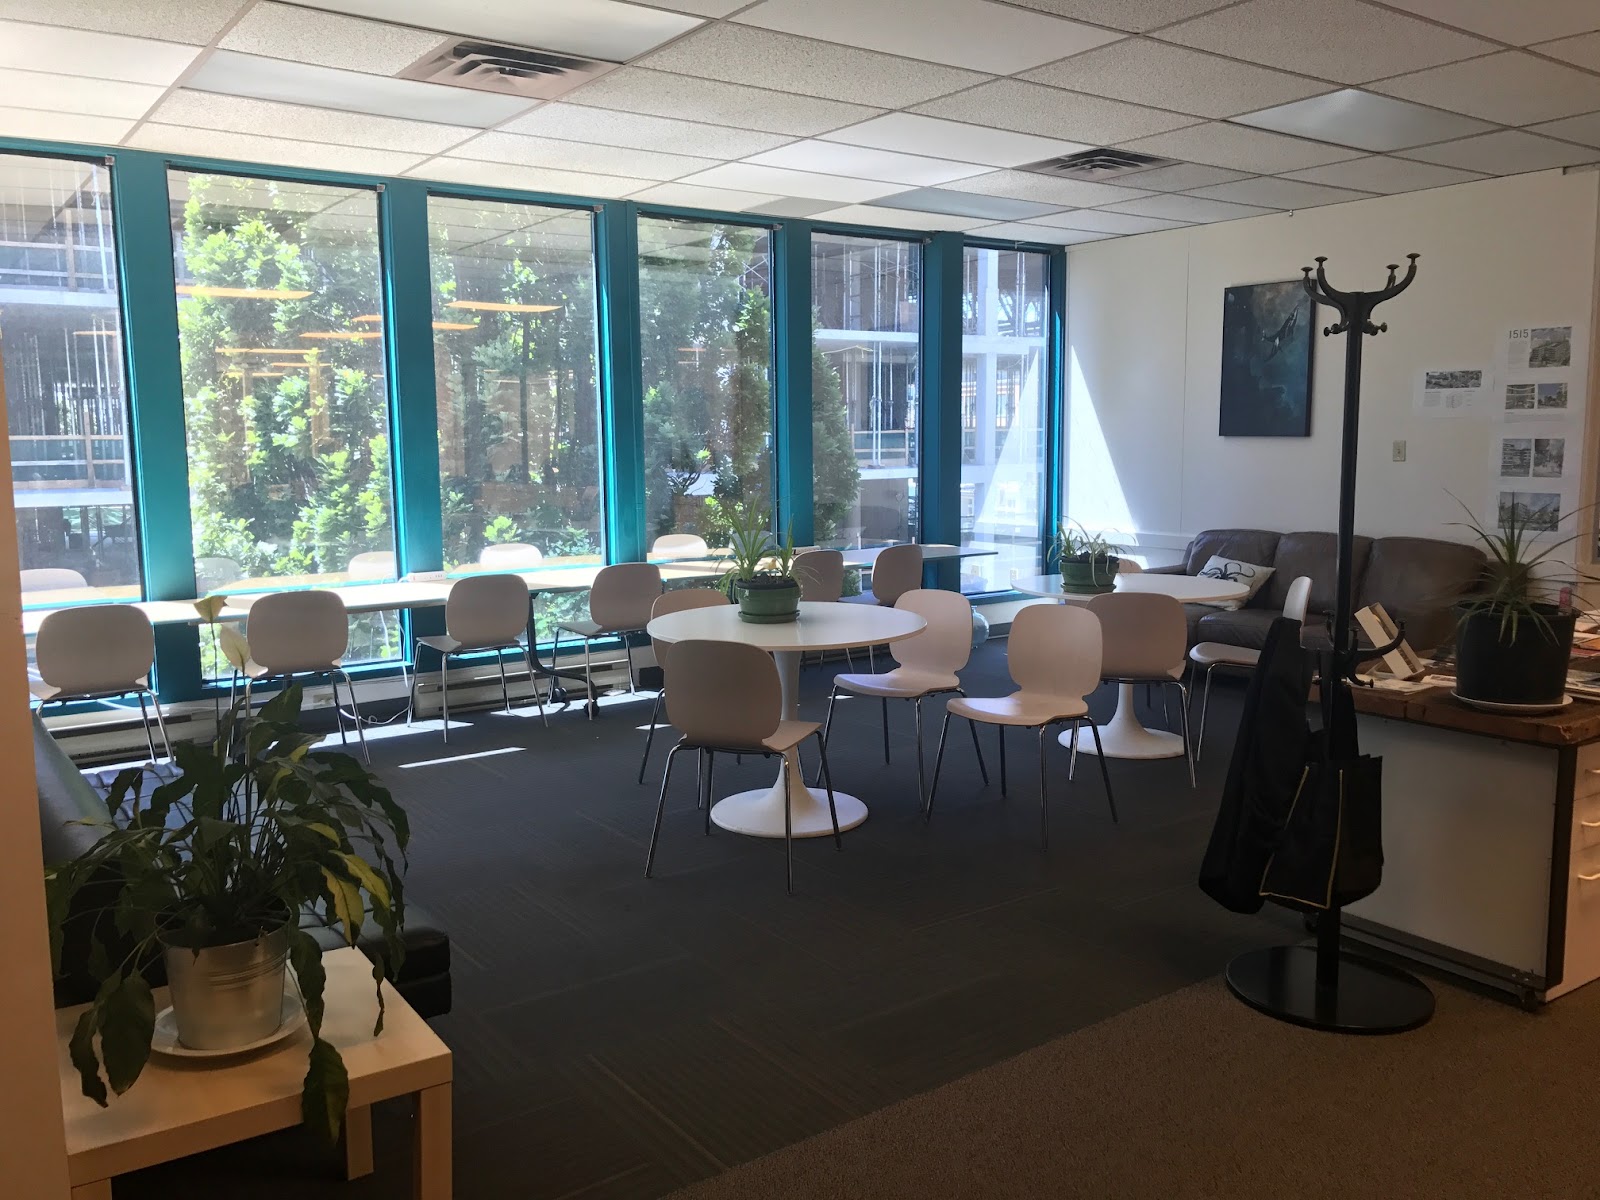 Coworking Space Victoria: 10 Best Spaces with Pricing, Amenities & Location [2021] 1